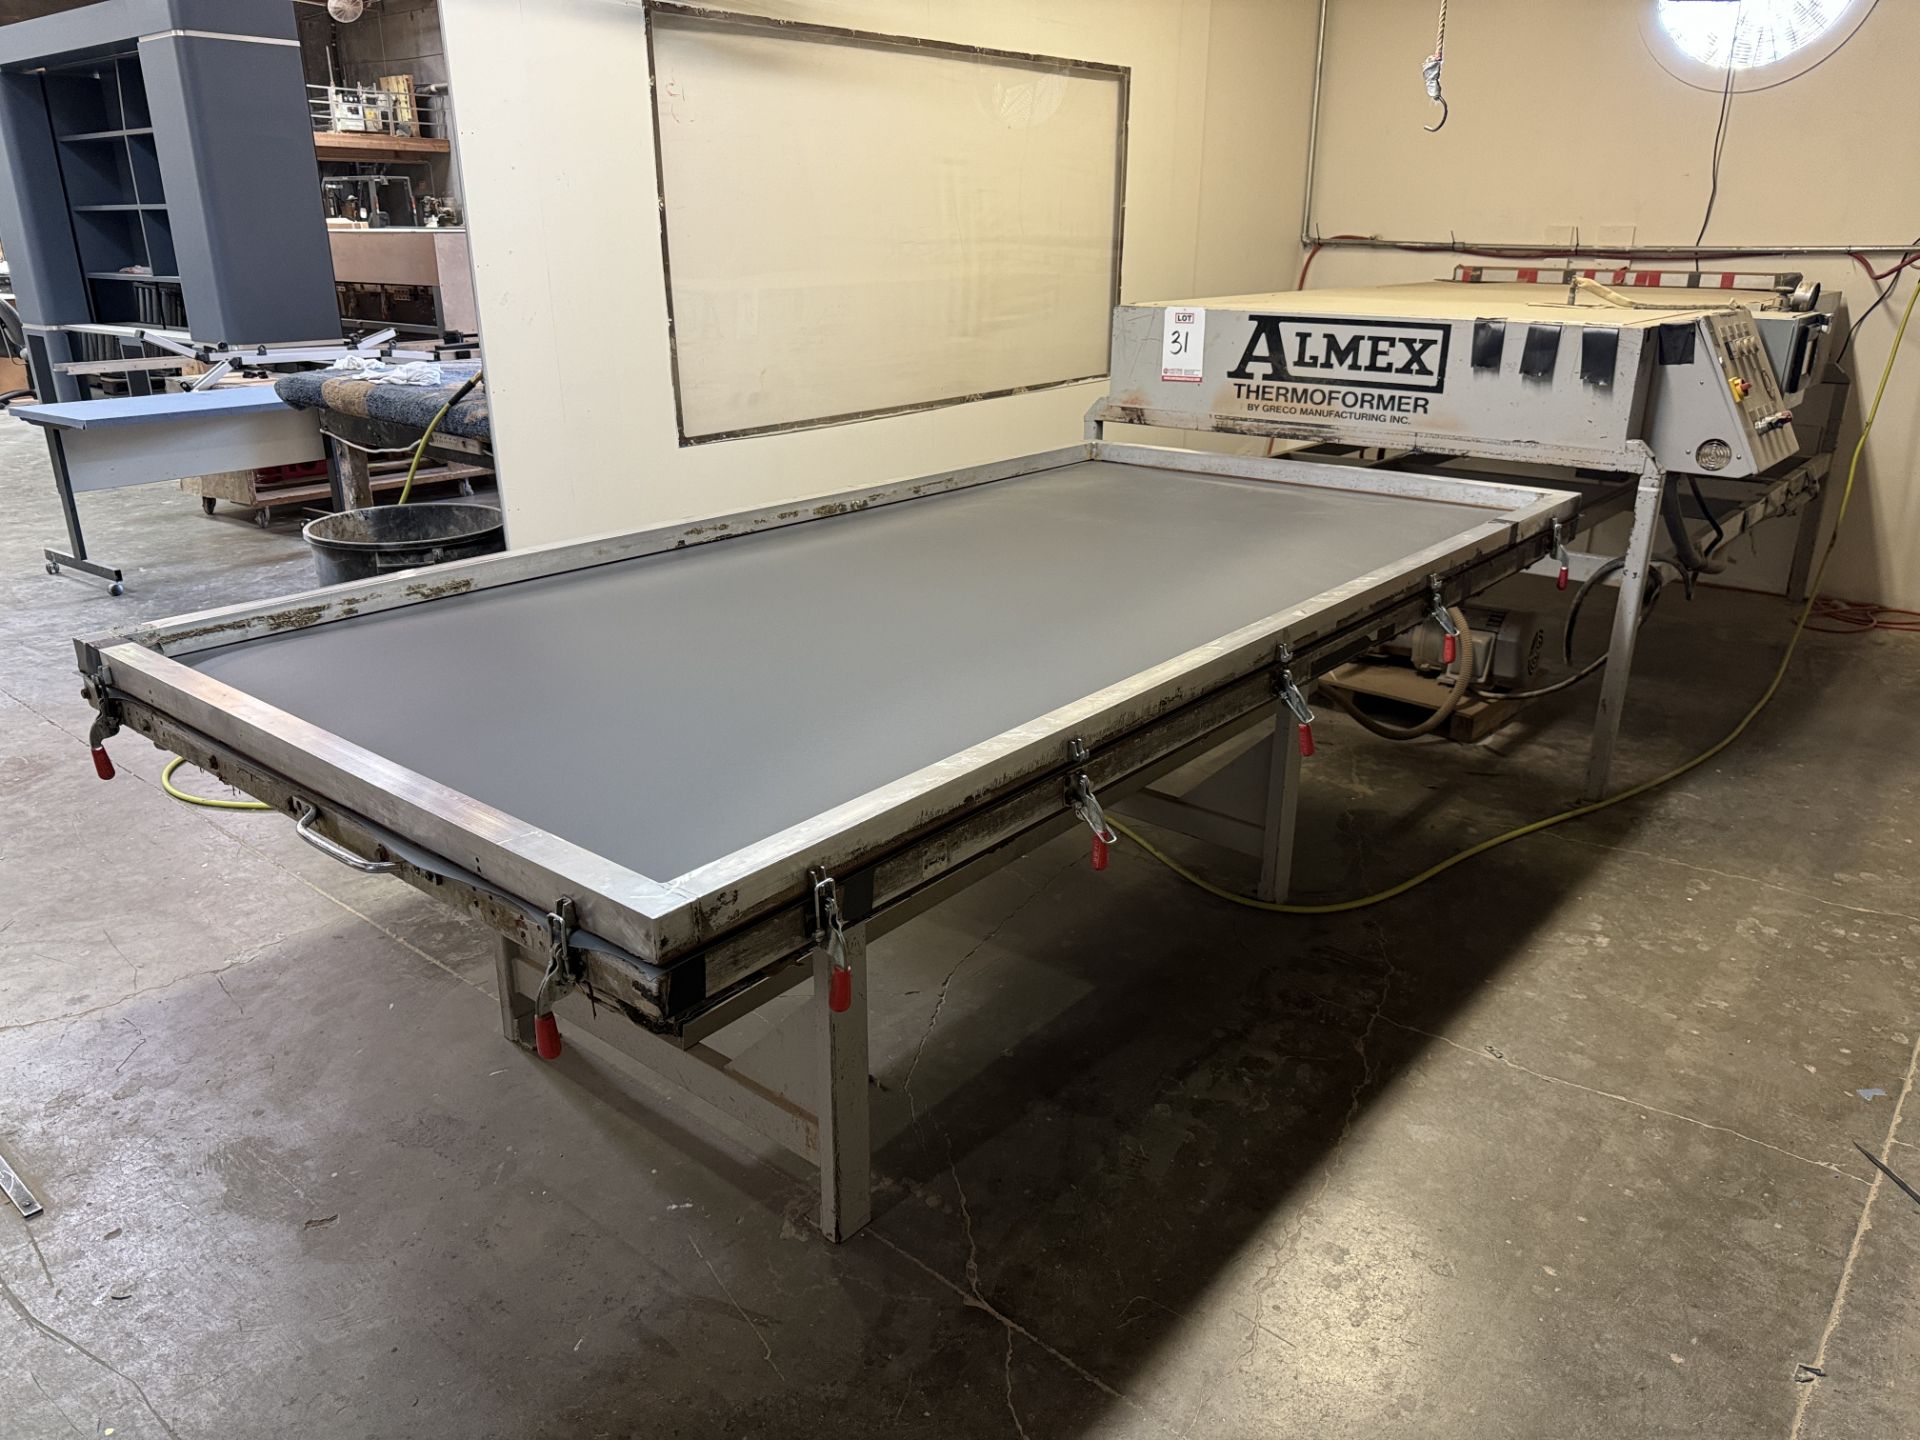 ALMEX THERMOFORMER VACUUM PRESS, 52" X 107" AIR TABLE - Image 6 of 20